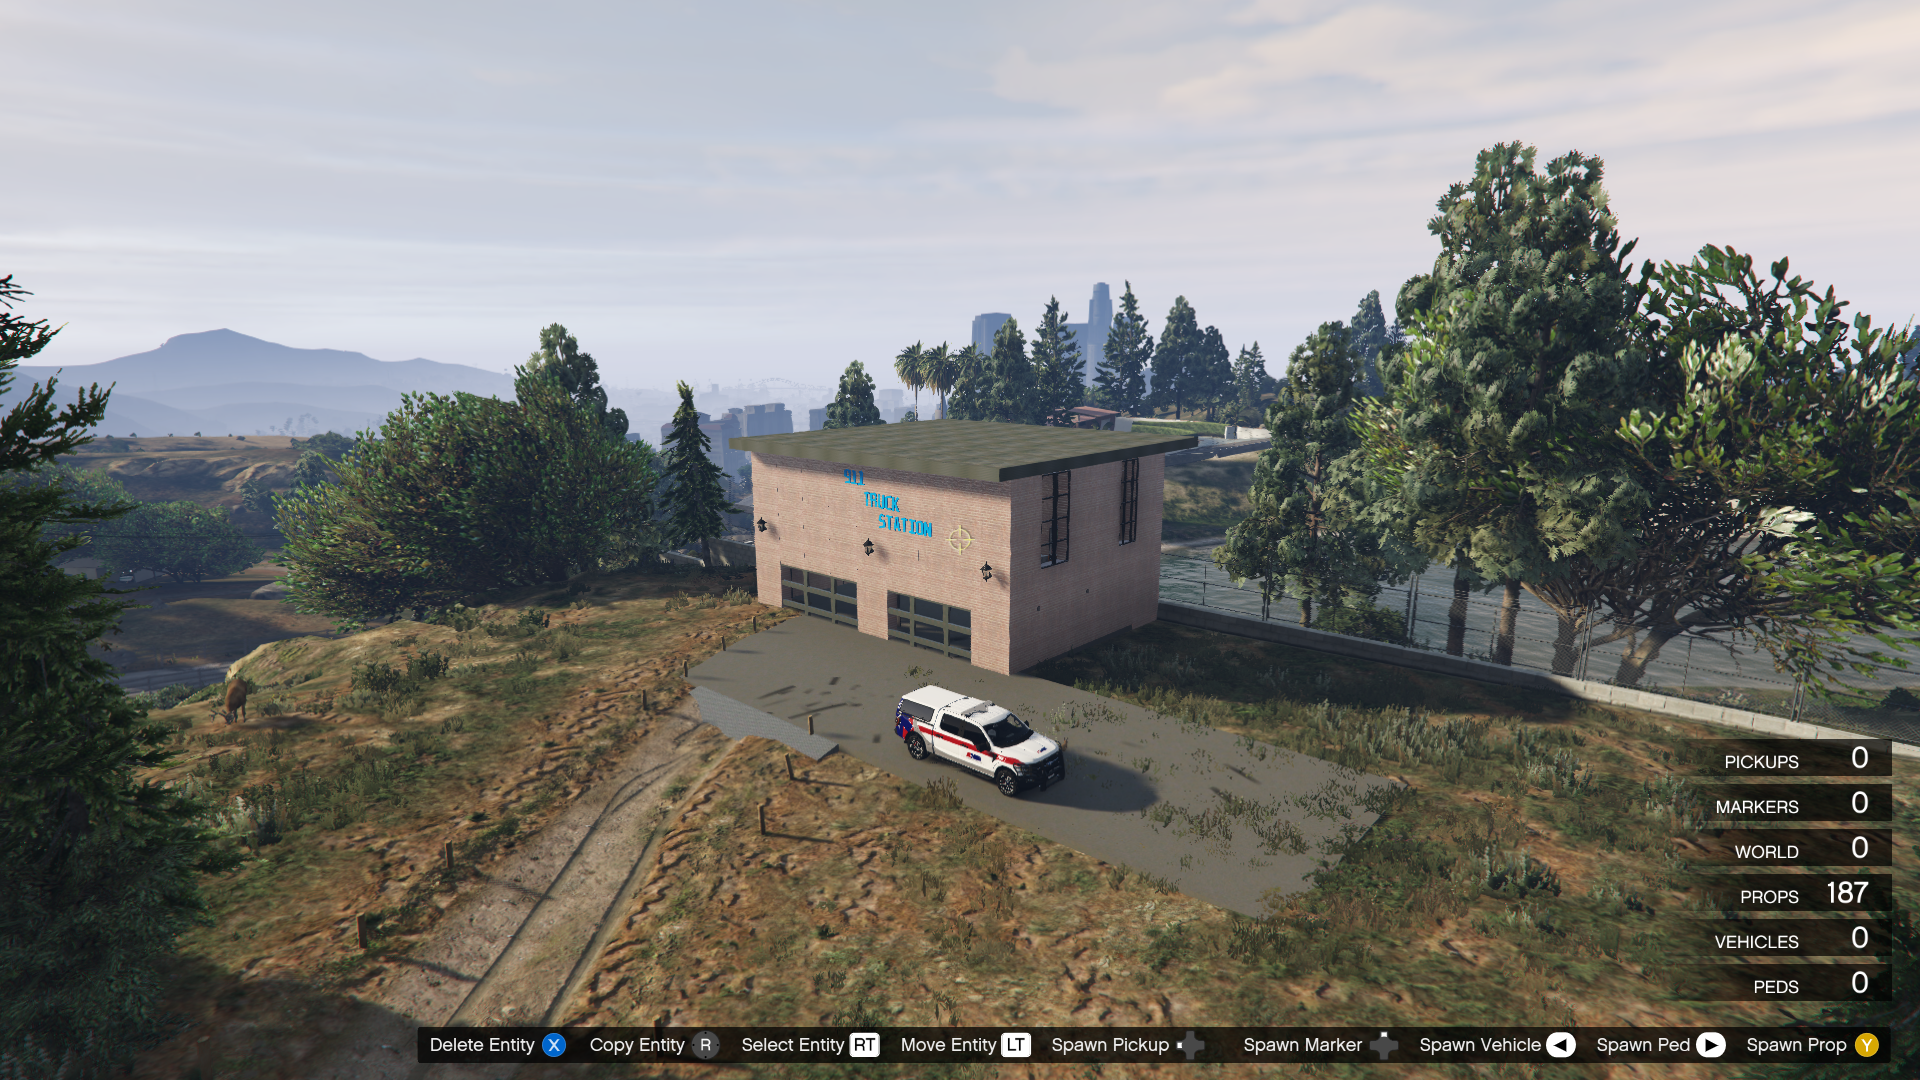 Grand_Theft_Auto_V_7_23_2022_6_37_33_PM.png